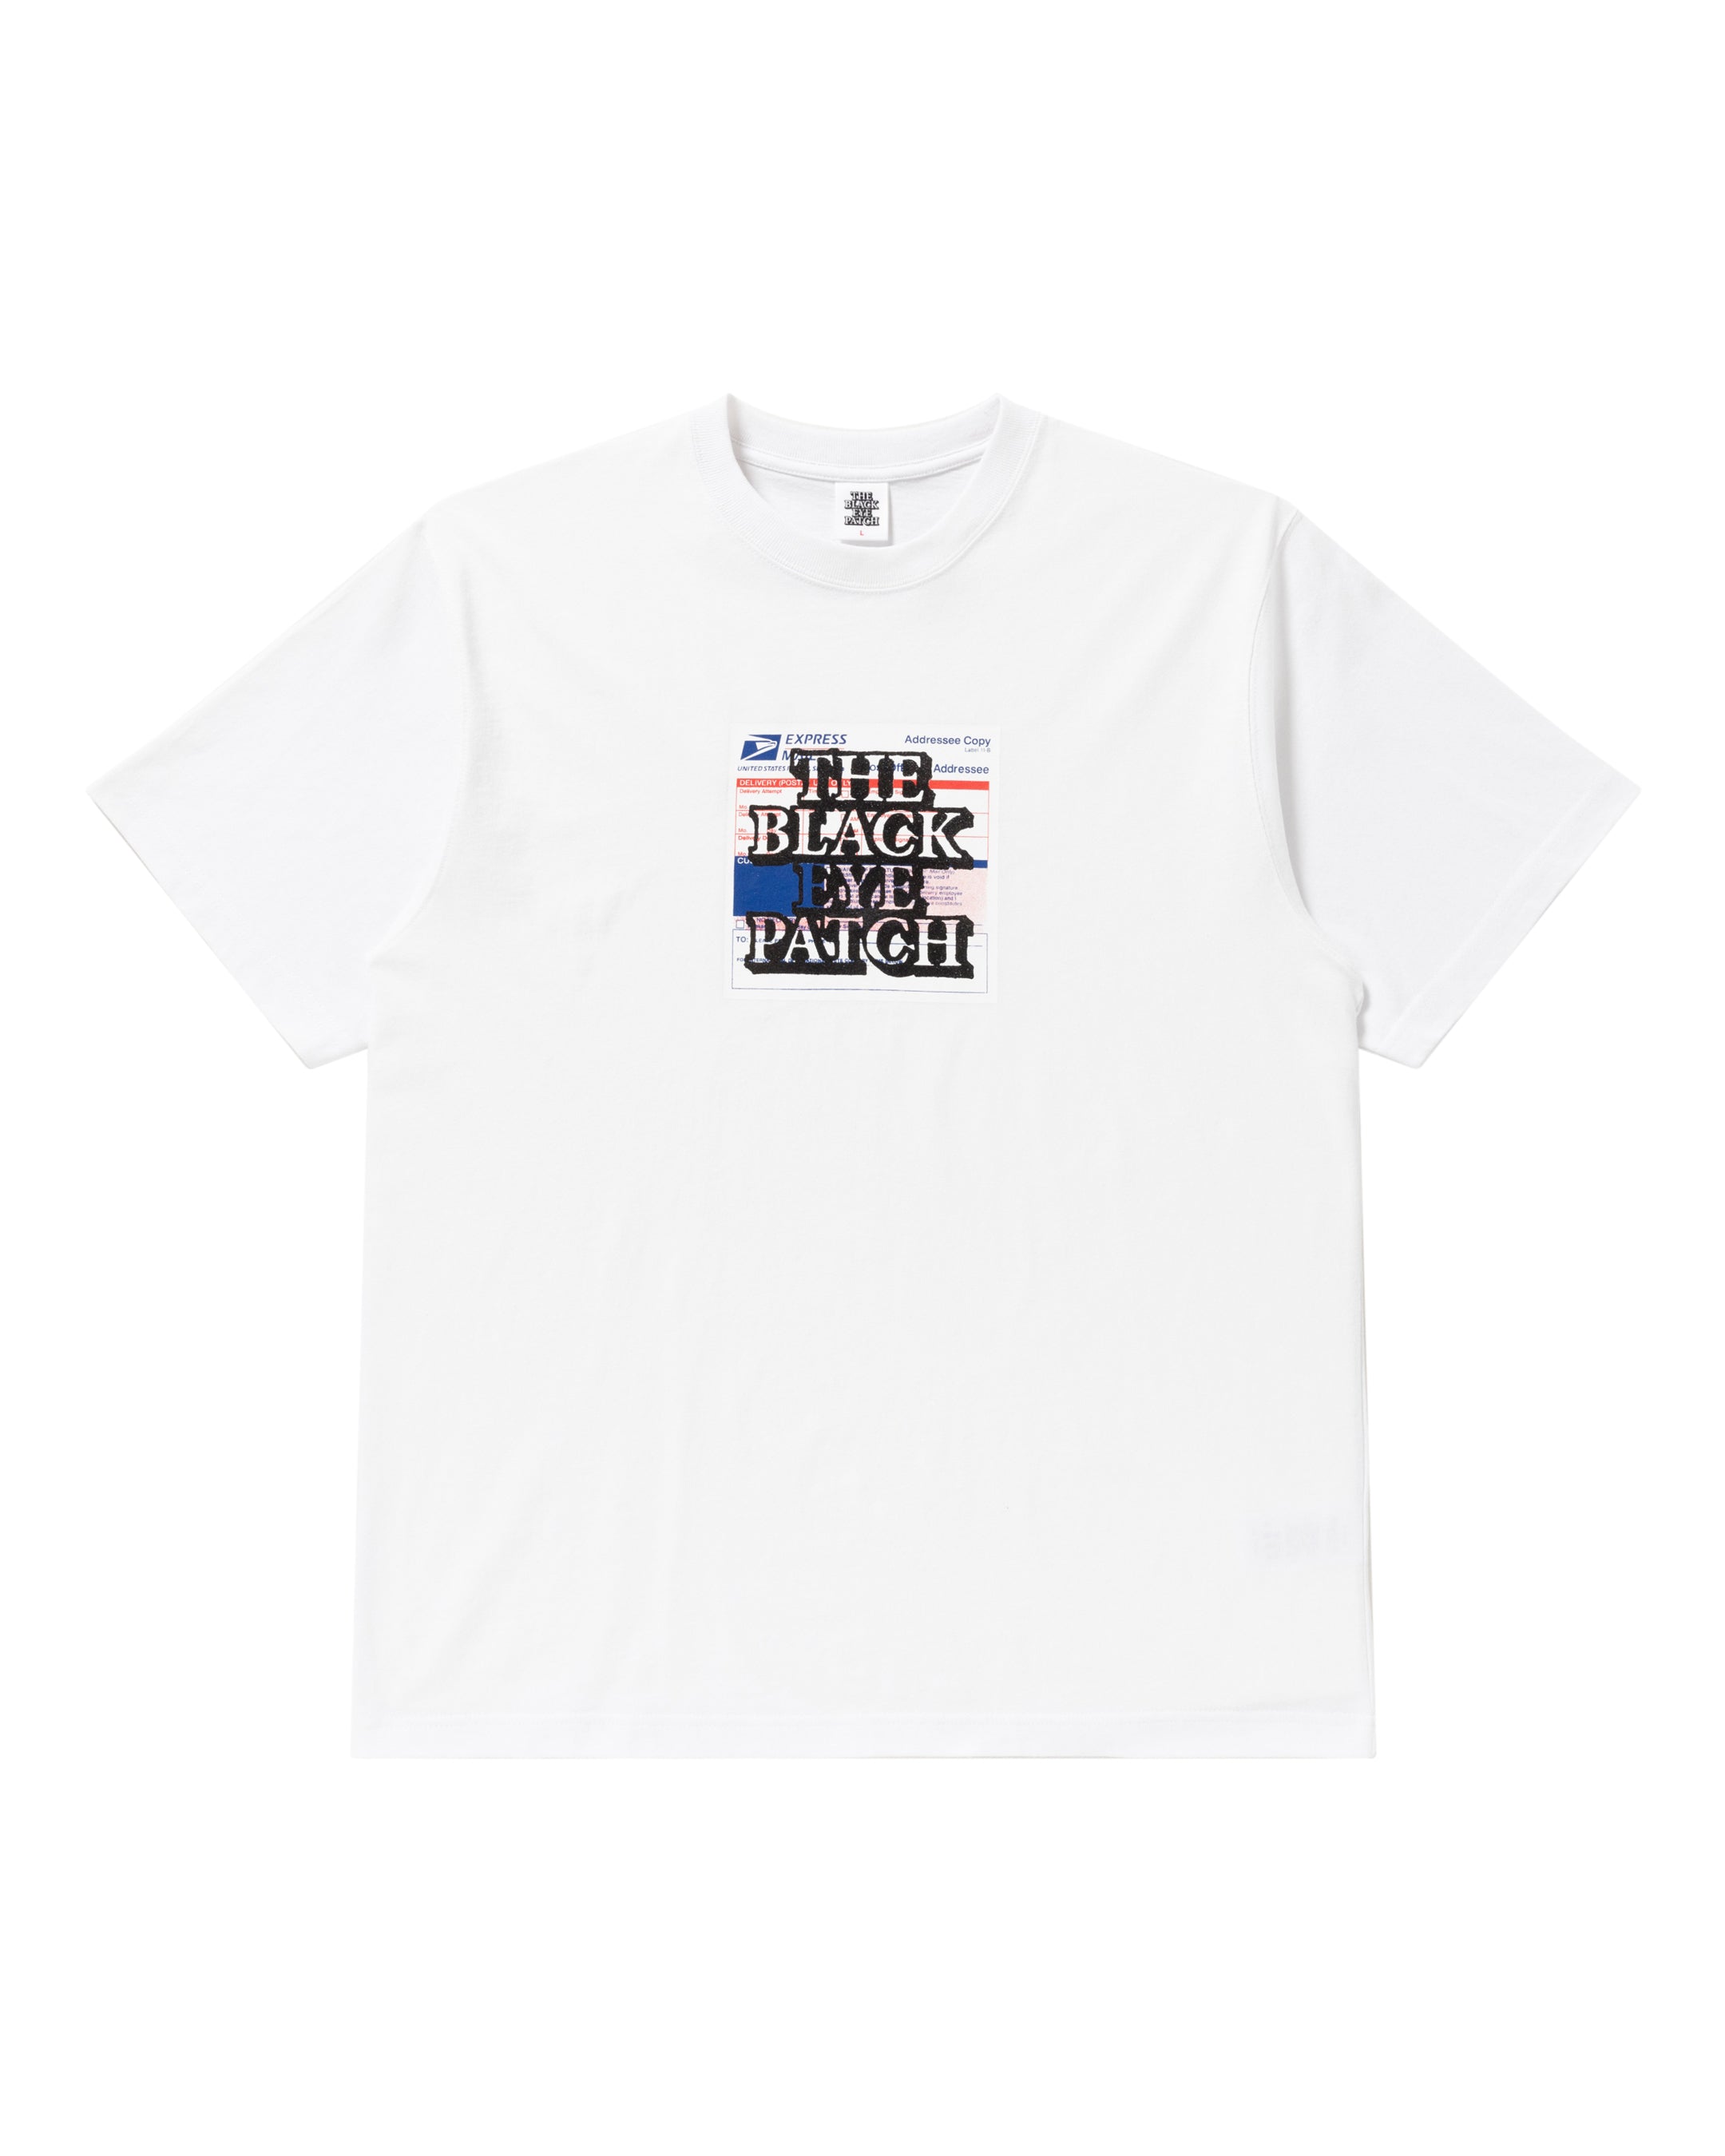 Wasted Youth PRIORITY LABEL TEE サイズ XLメンズ